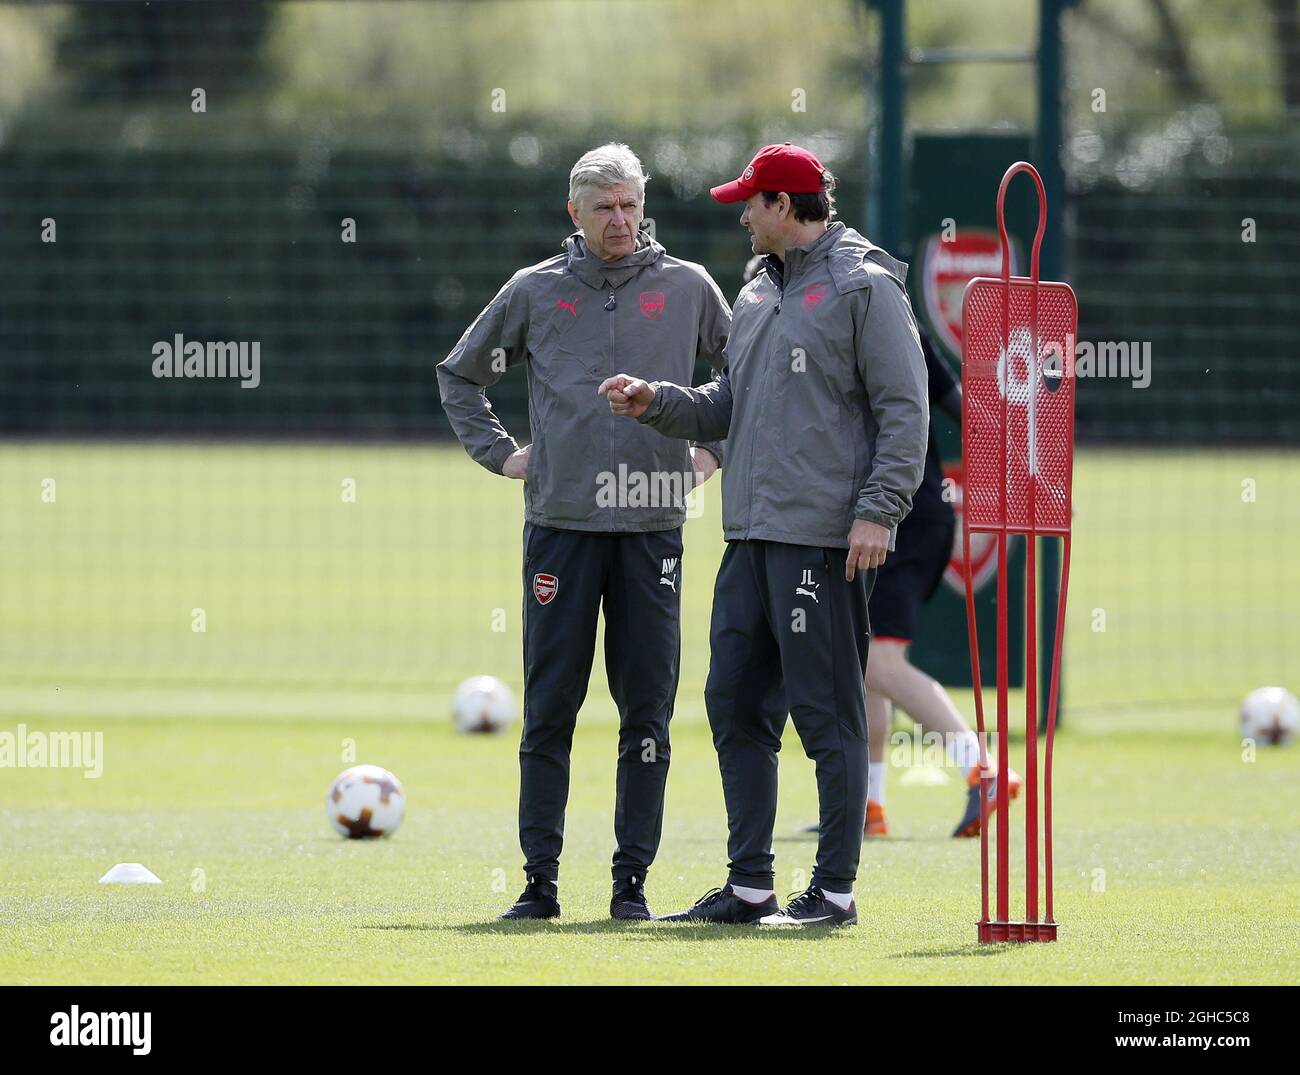 Arsenal's Arsene Wenger with Jens Lehmann during the training session at the Arsenal Training Centre, London Colney. Picture date: 25th April 2018. Picture credit should read: David Klein/Sportimage via PA Images Stock Photo